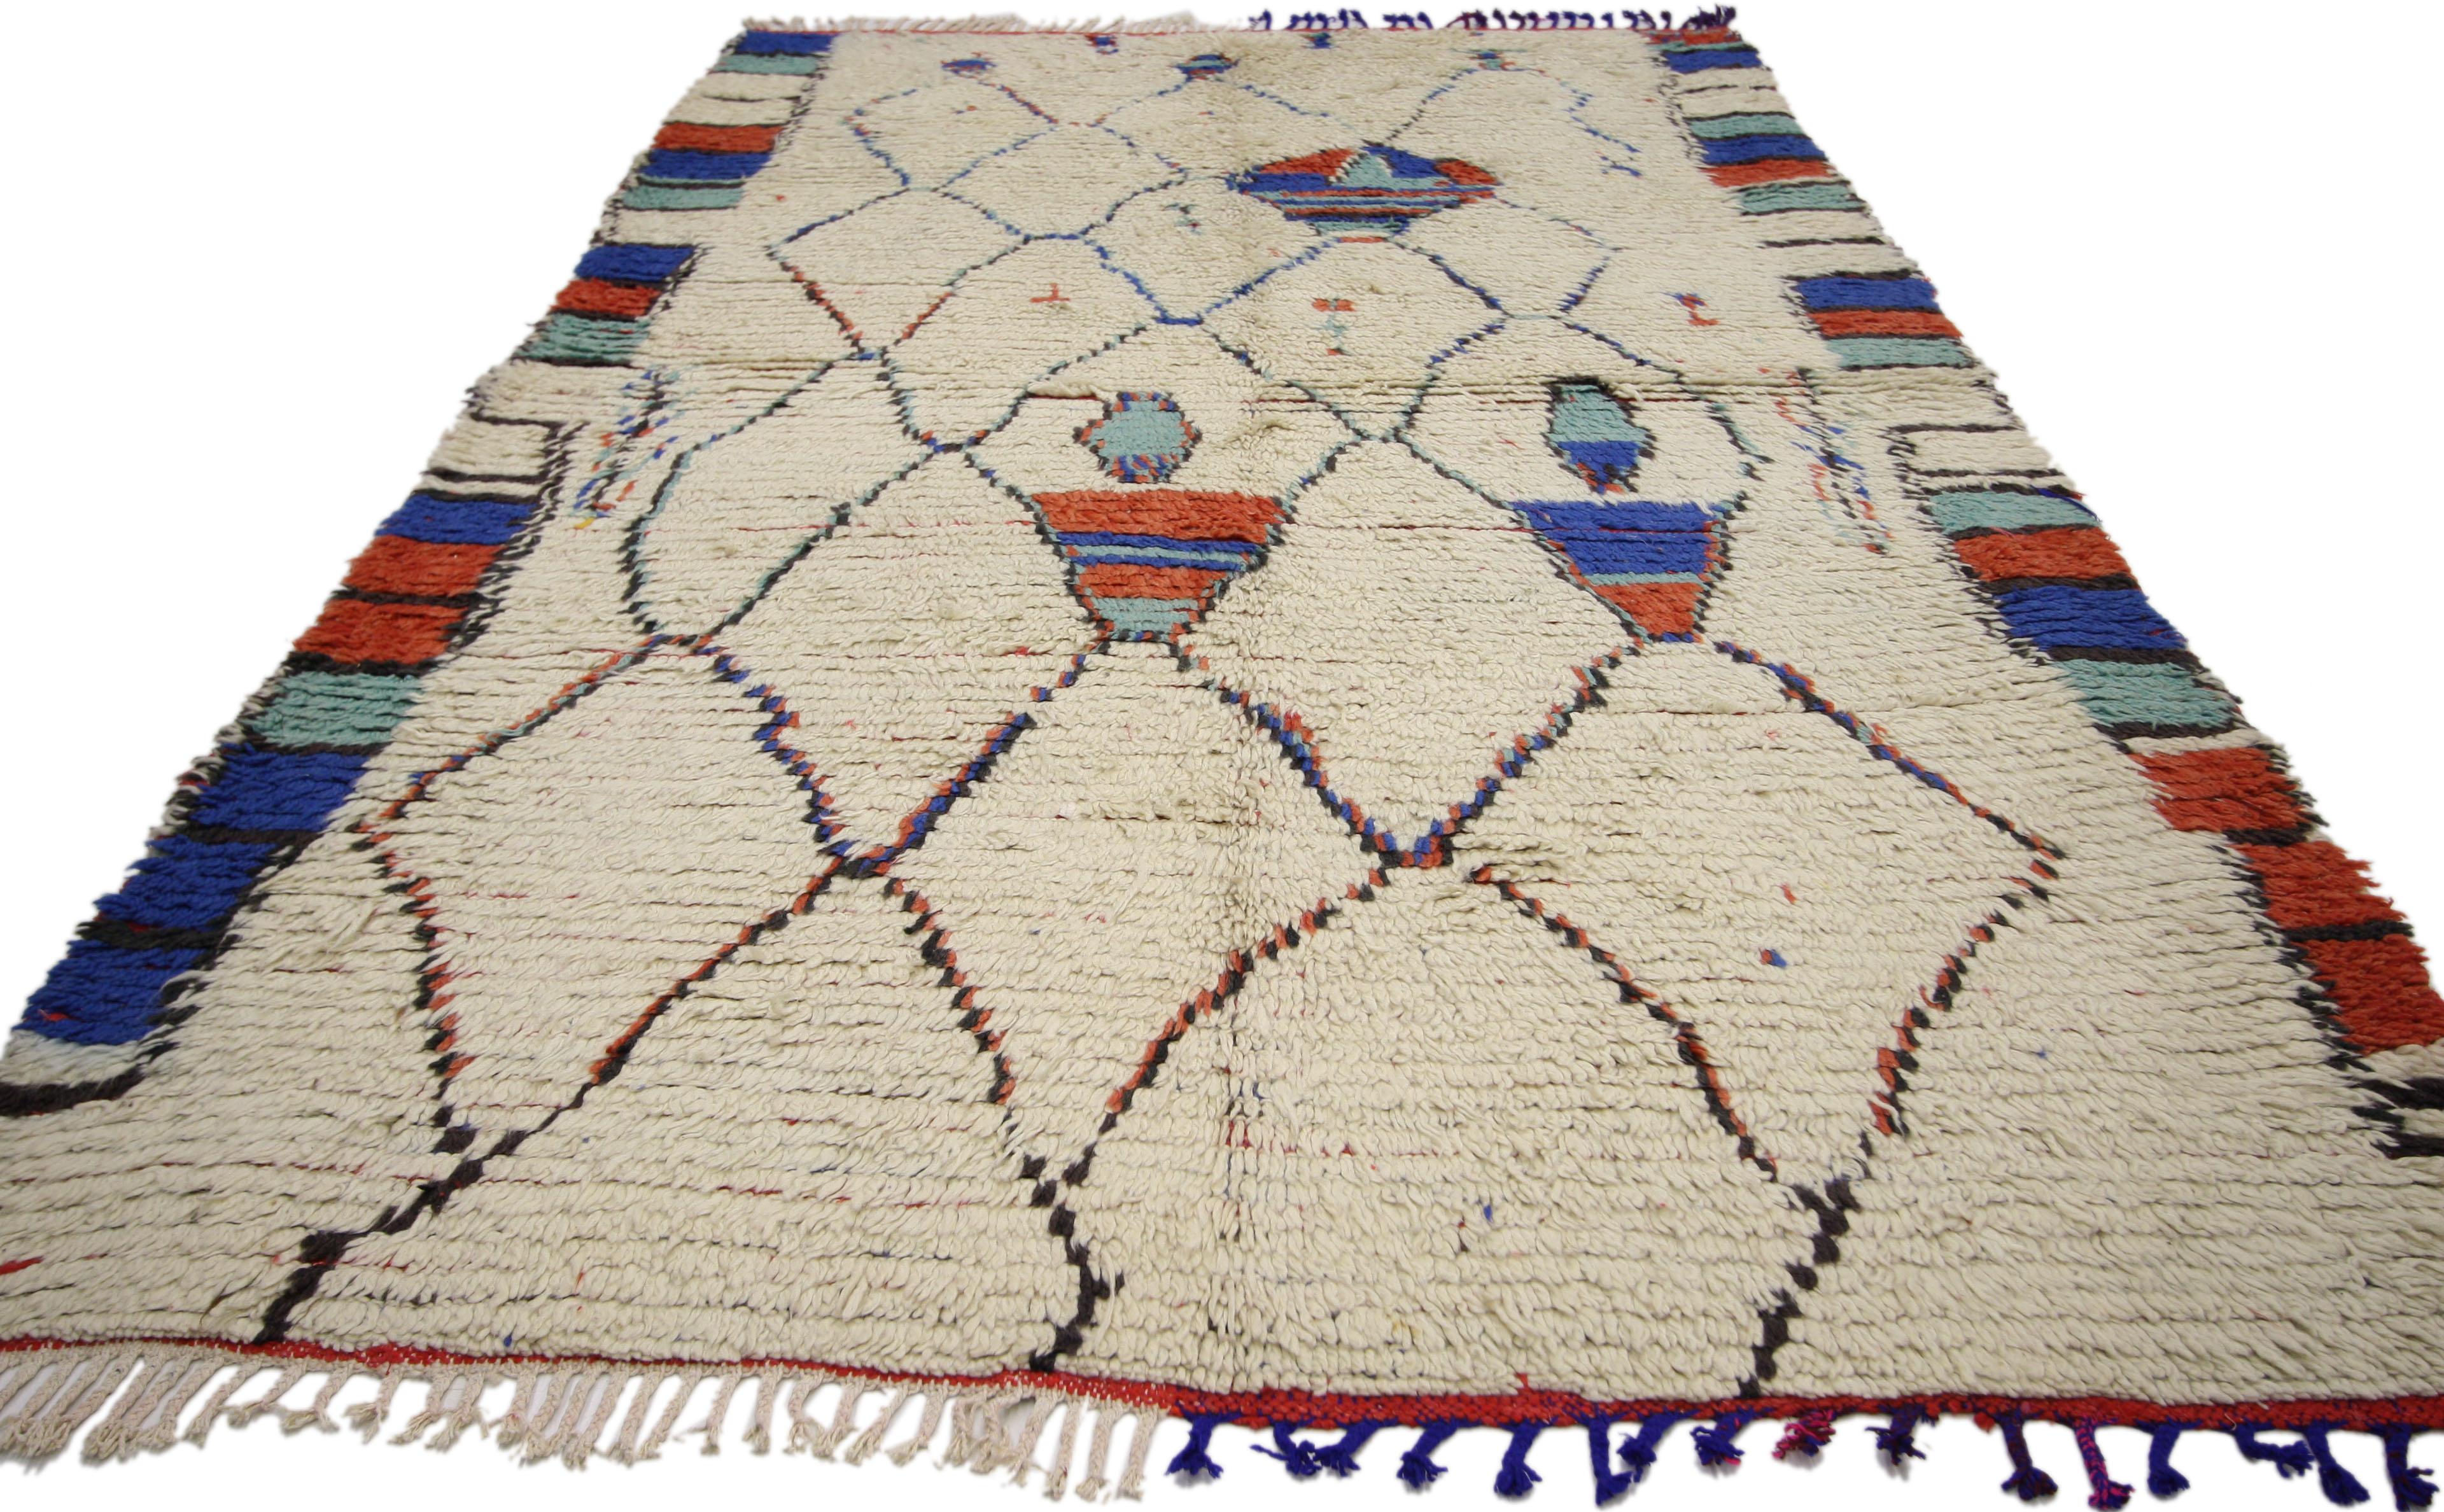 Hand-Knotted Vintage Moroccan Rug, Berber Moroccan Azilal Tribal Rug